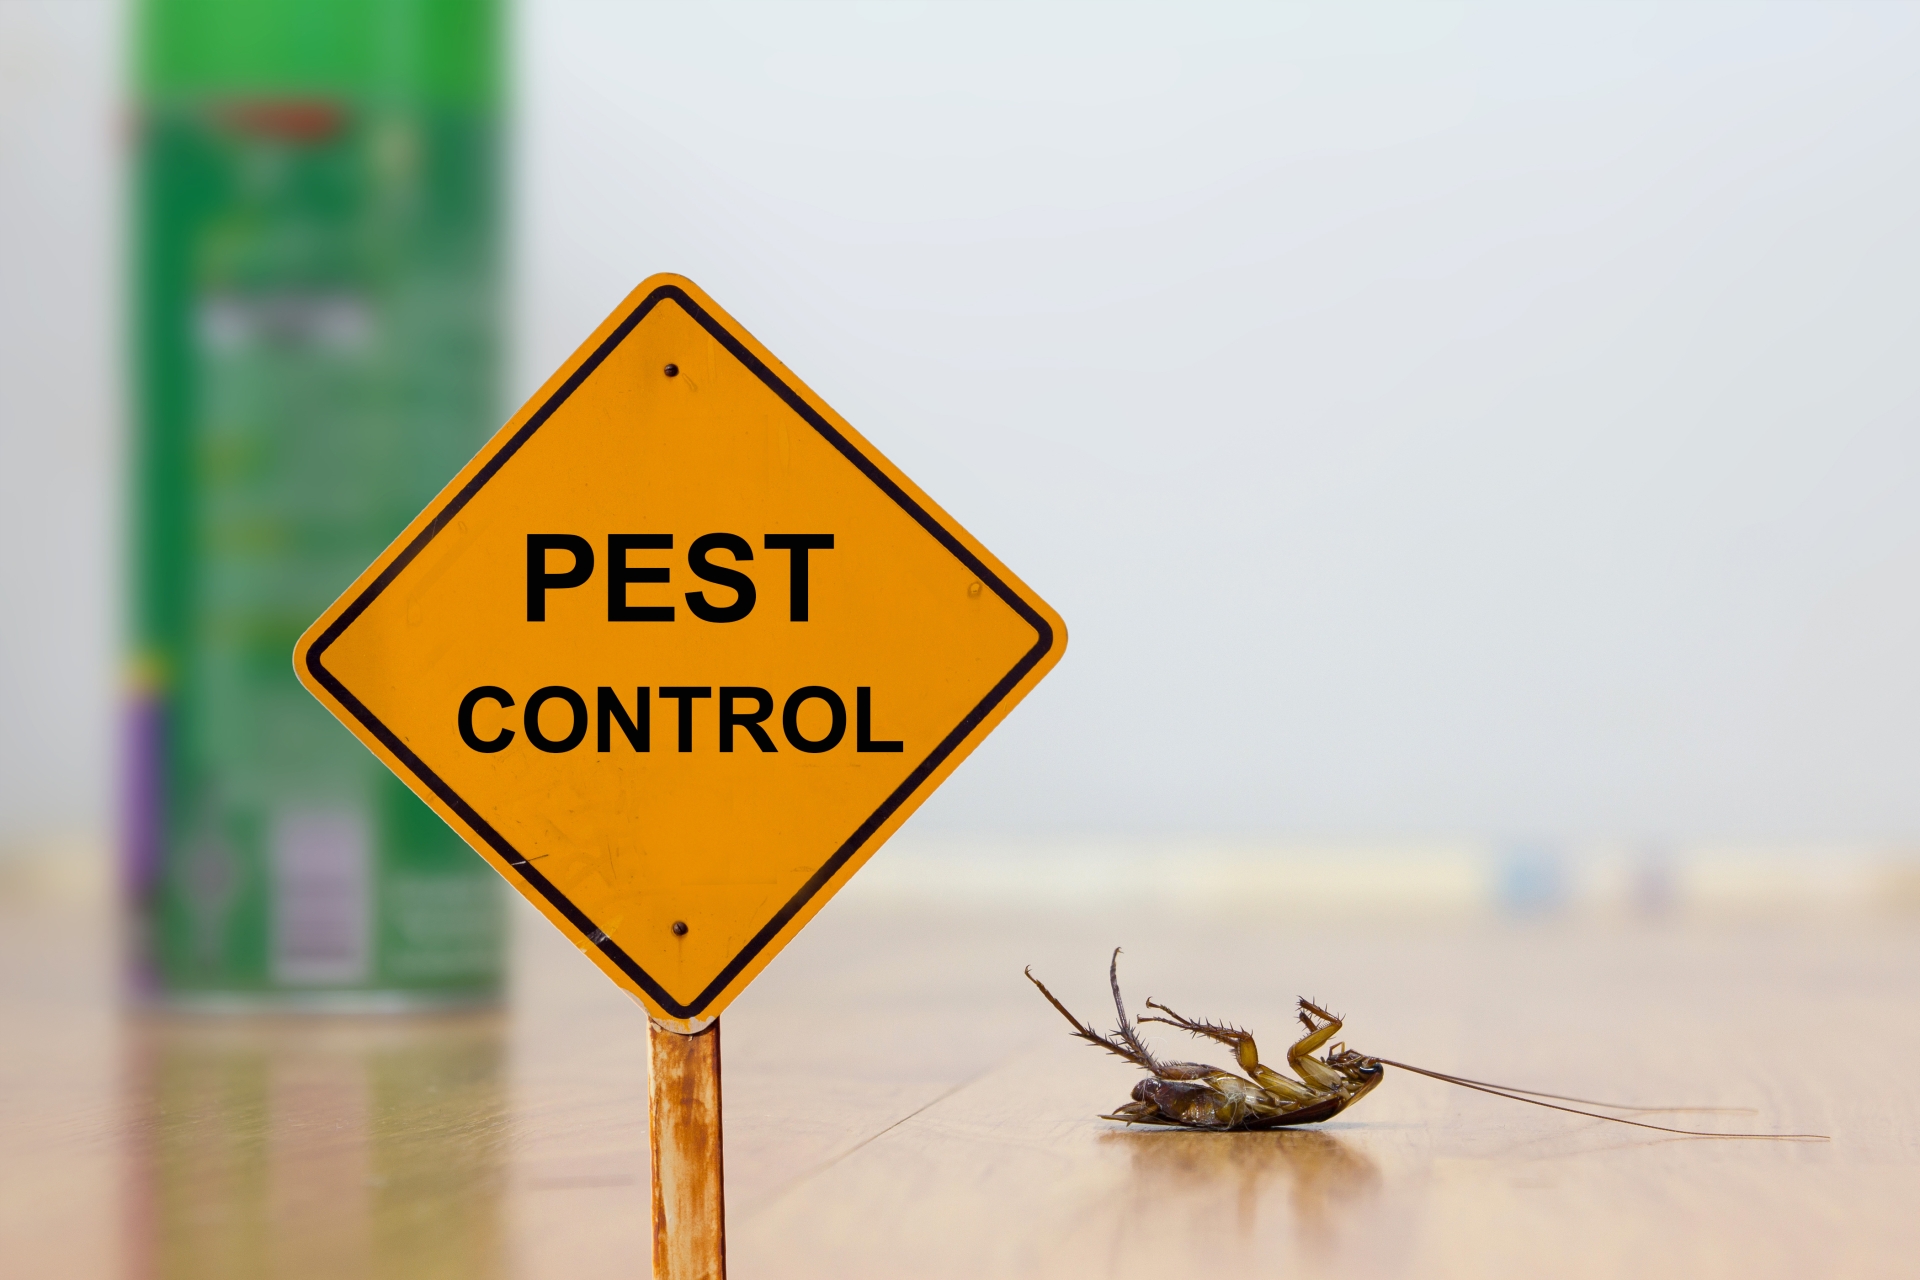 24 Hour Pest Control, Pest Control in Addlestone, New Haw, Woodham, KT15. Call Now 020 8166 9746